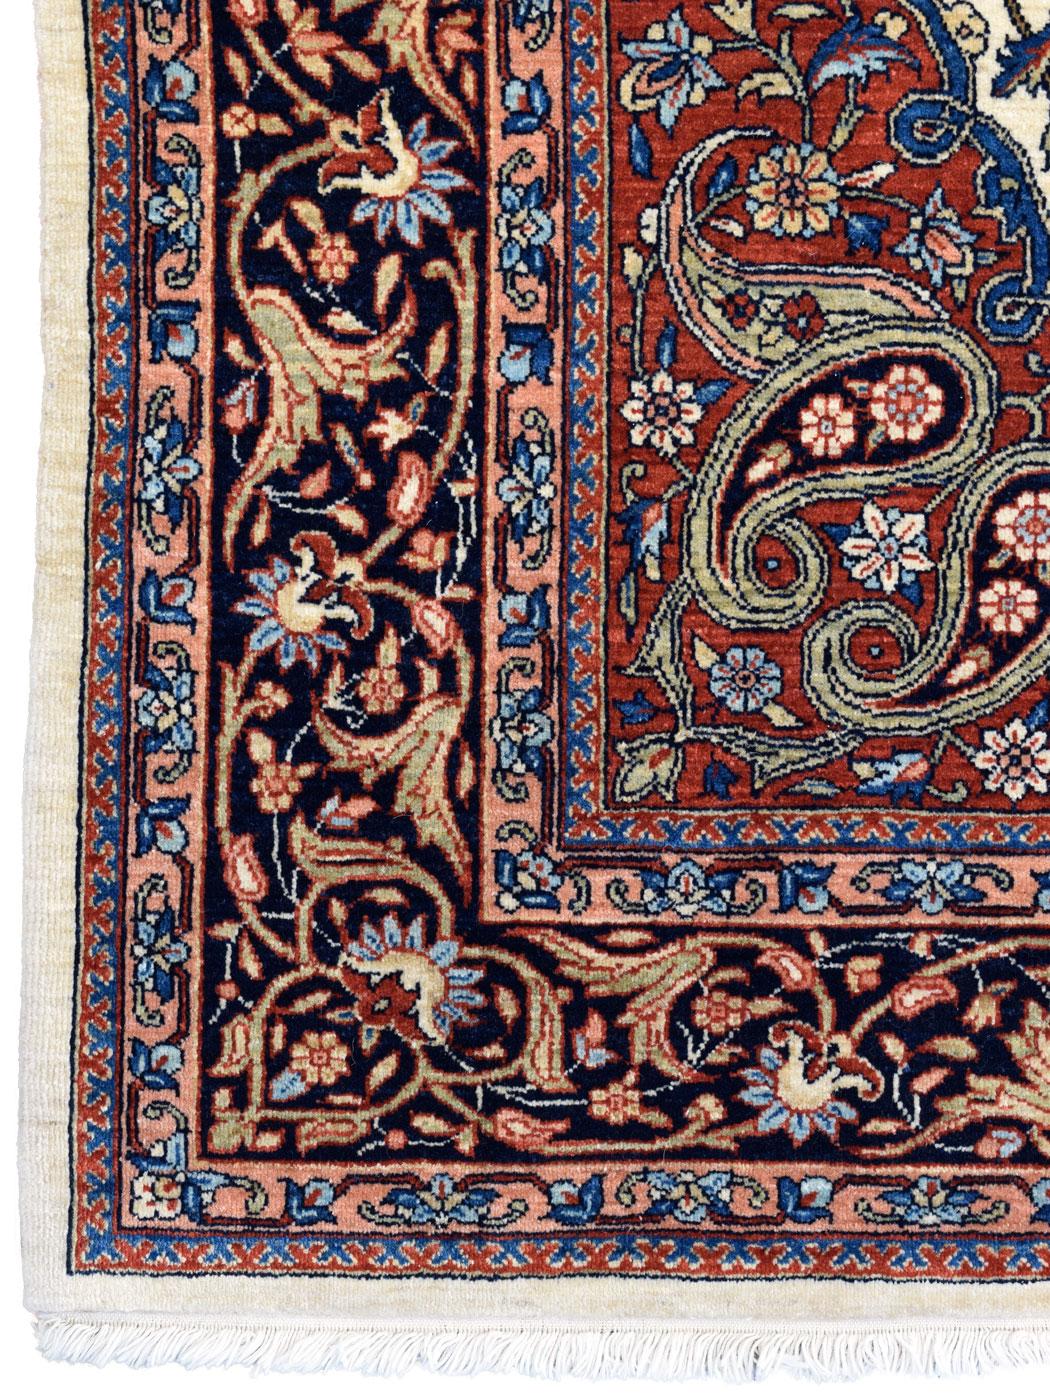 A dazzling display of Persian craftsmanship, this 5' x 7' area rug features a captivating interplay of blue, red, and cream, echoing the esteemed Mohtashan designs of Kashan. Ensconced within majestic floral curvilinear lined motifs, the bold